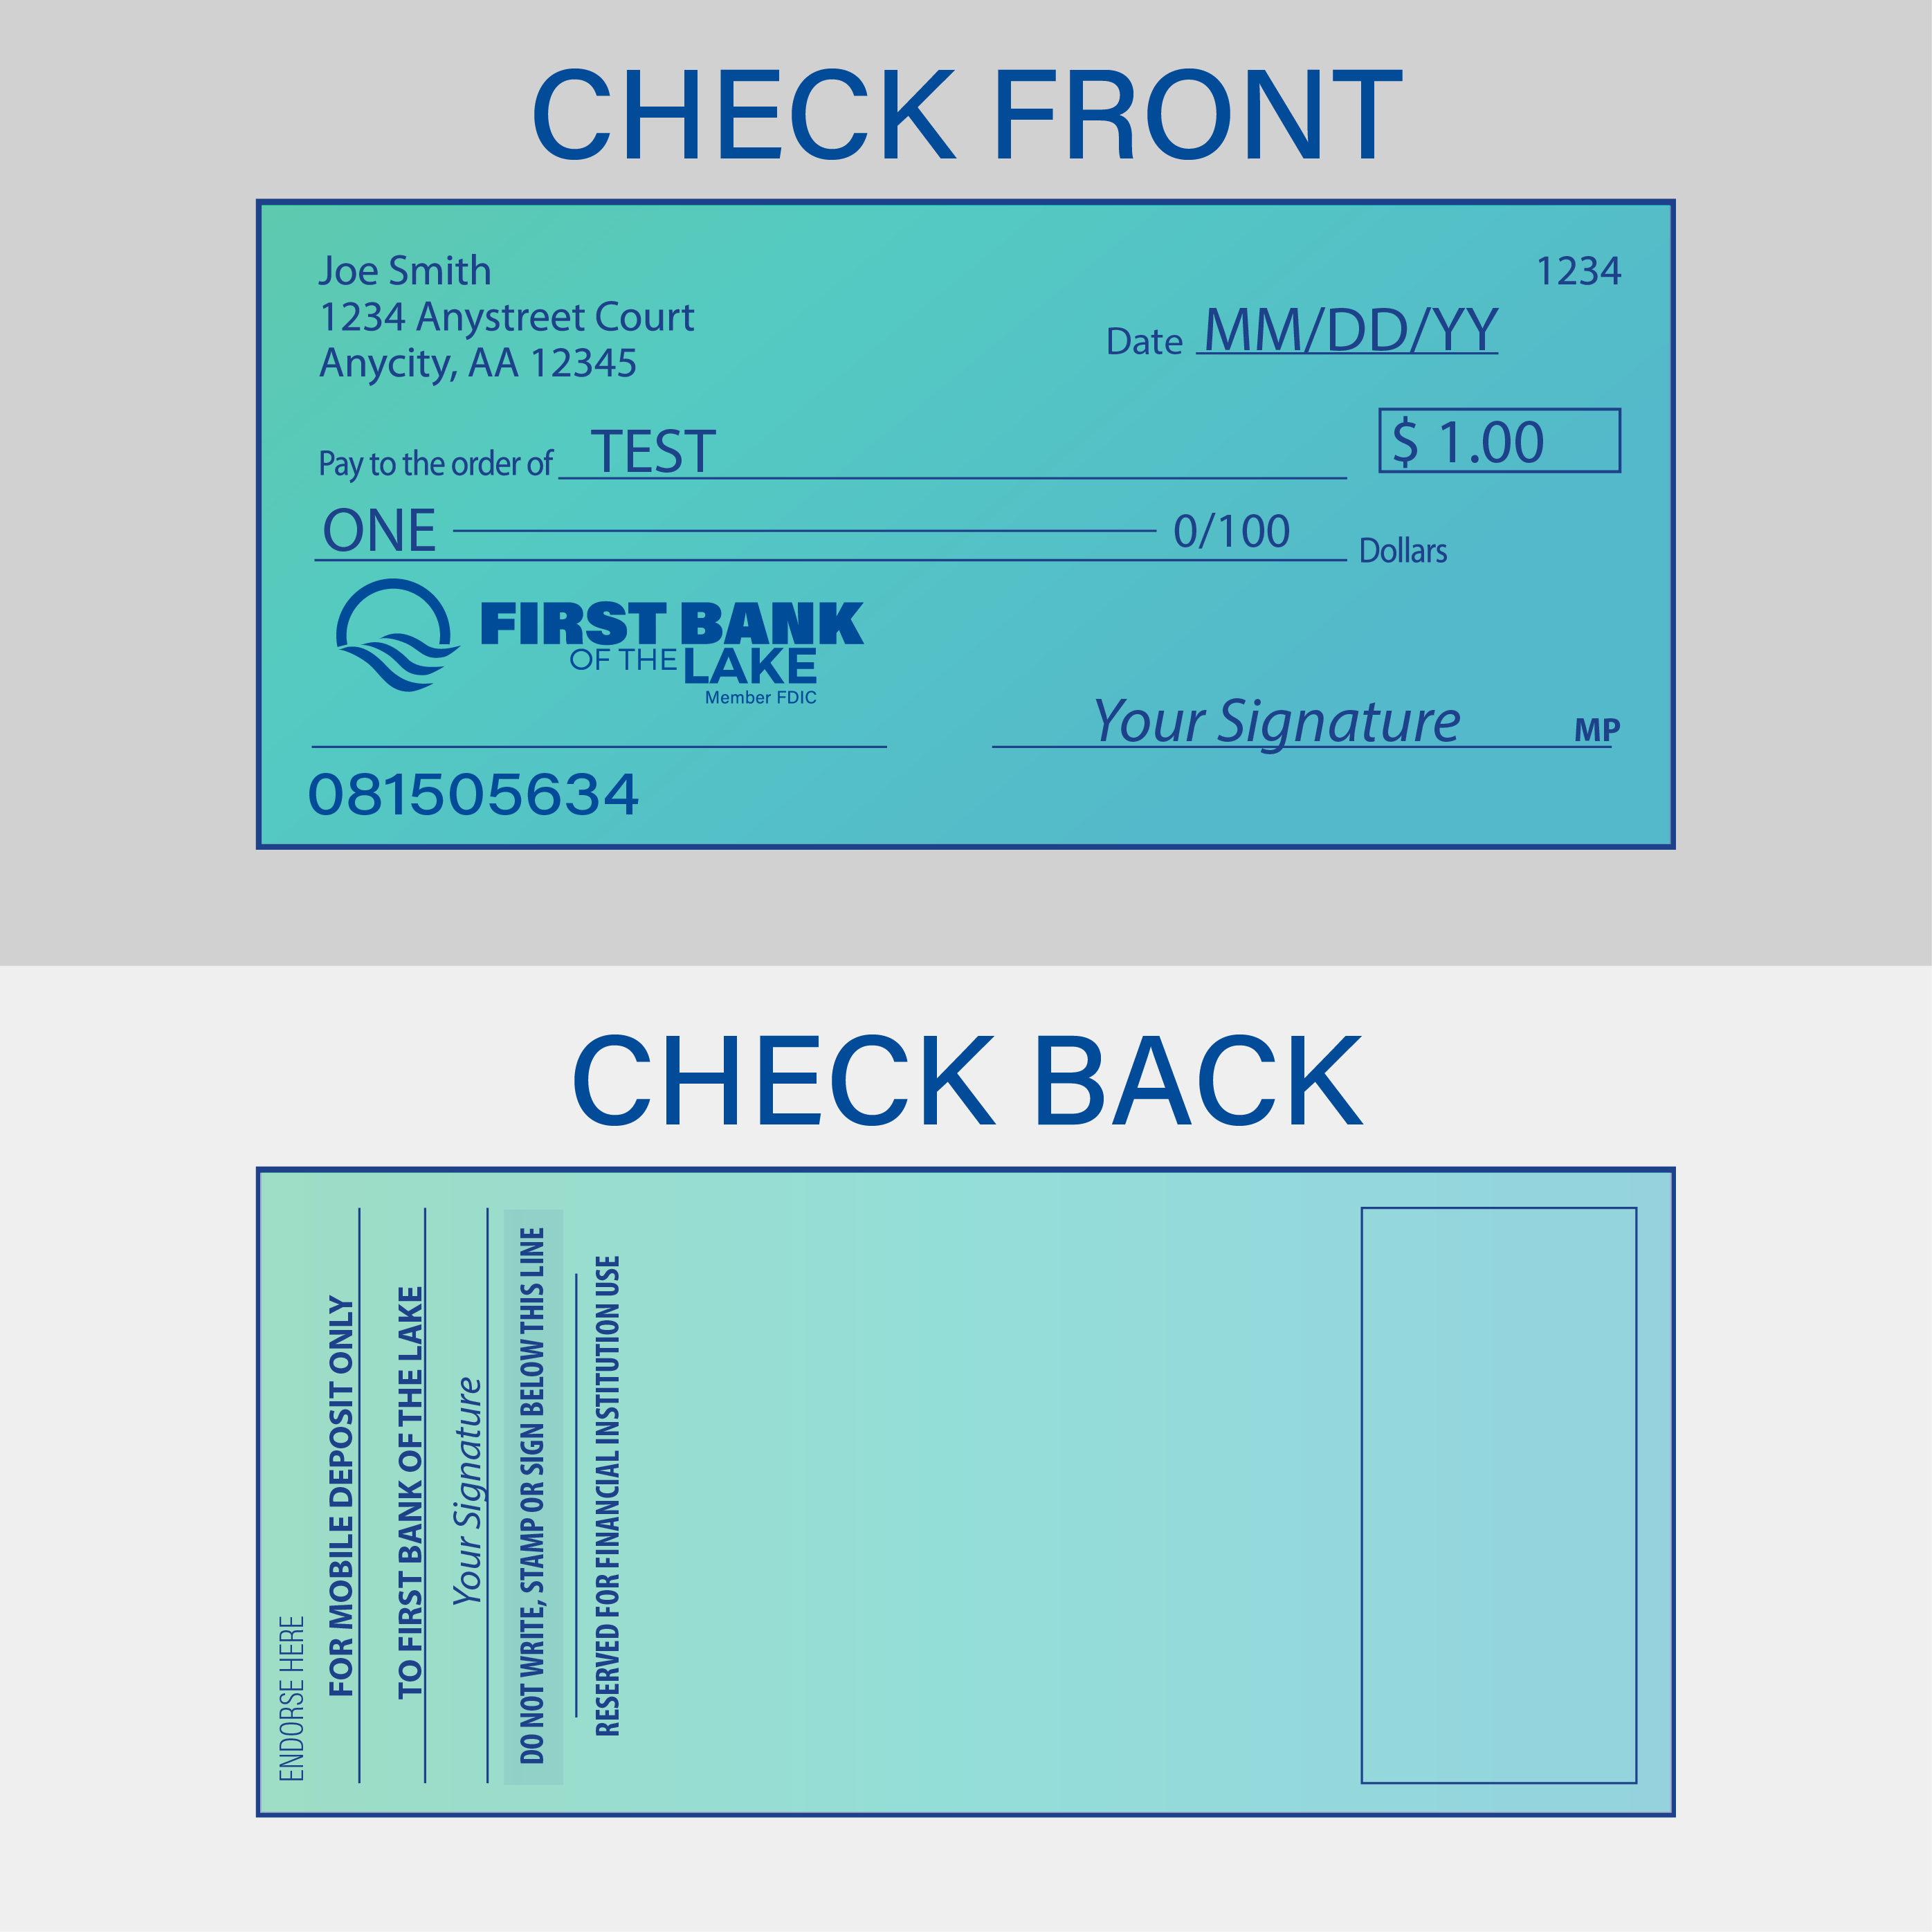 Mobile Deposit graphic of the front and back of a check.